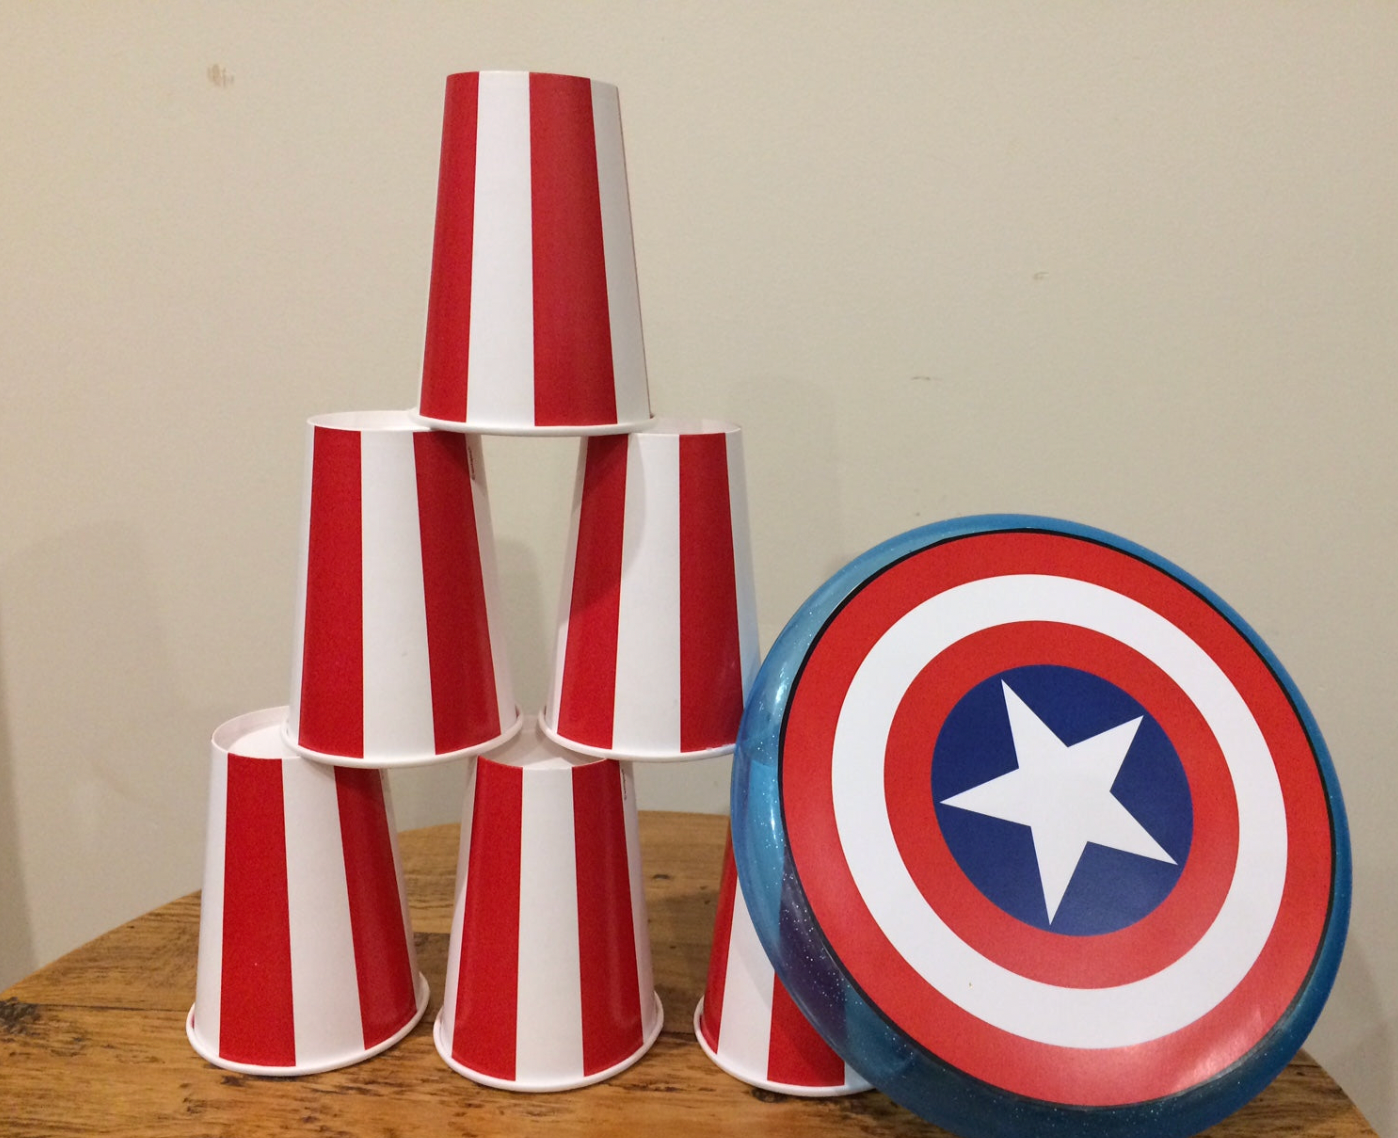 Superhero party games for kids